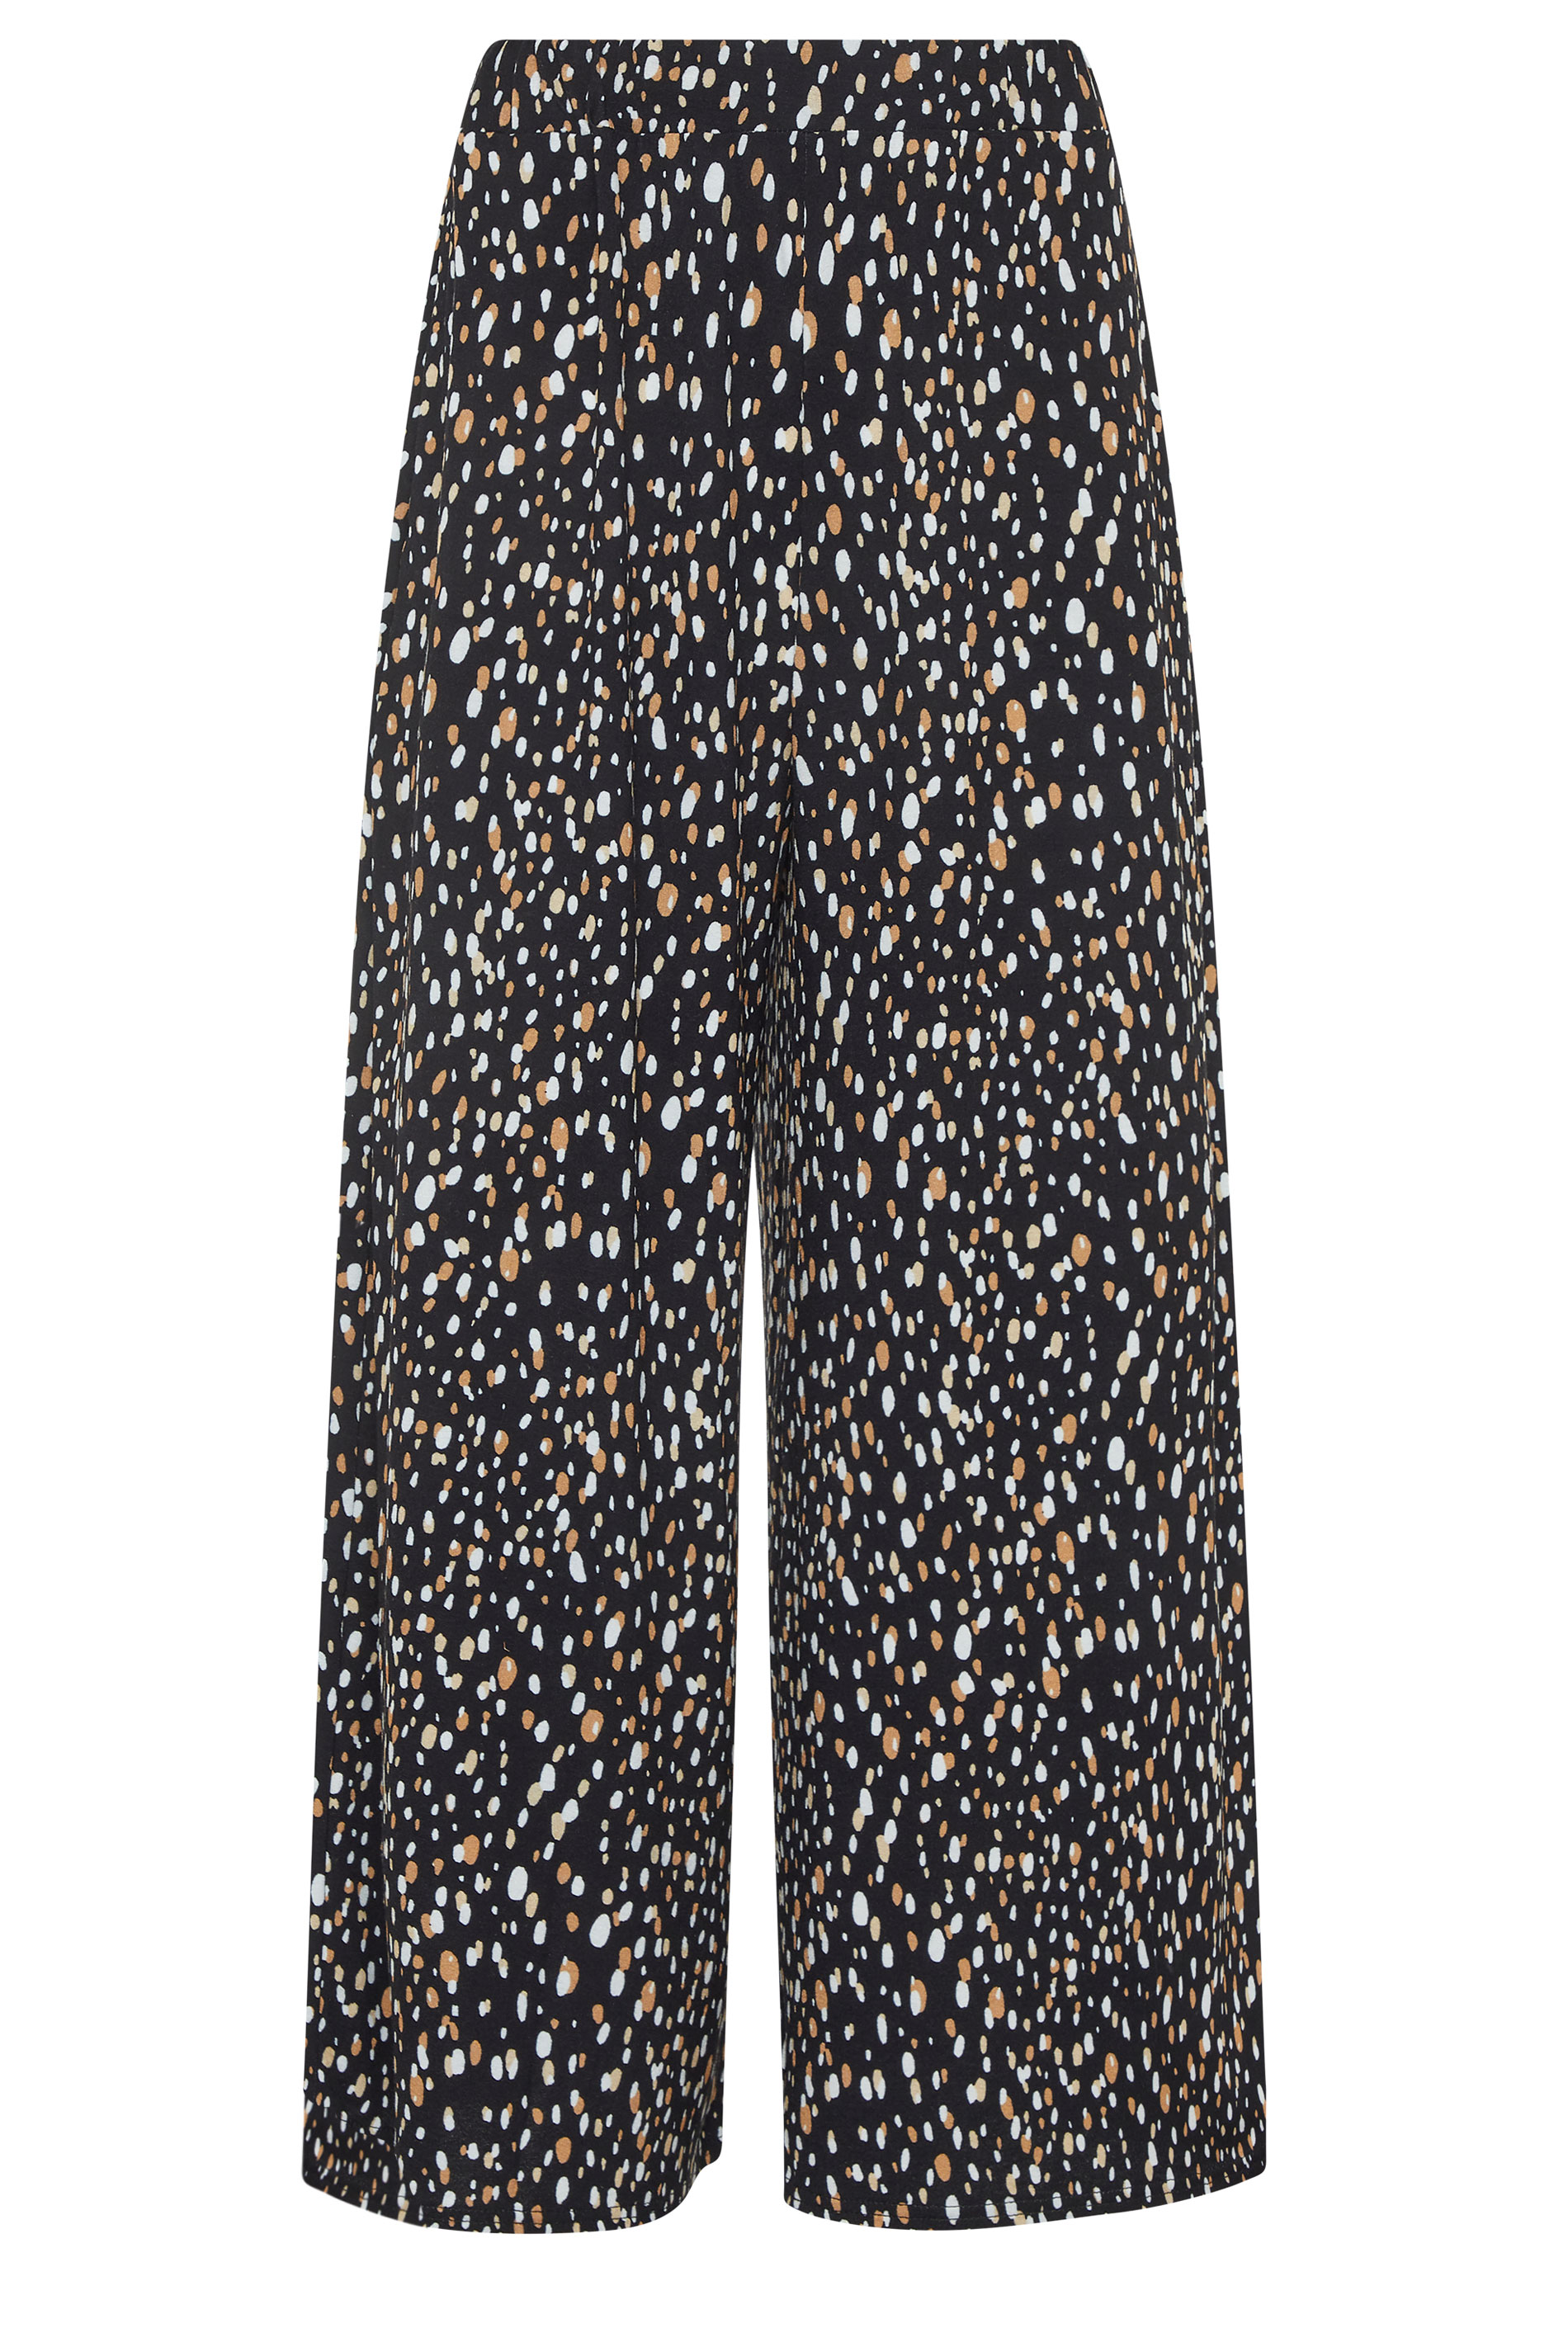 LTS Black Abstract Spot Cropped Trousers | Long Tall Sally